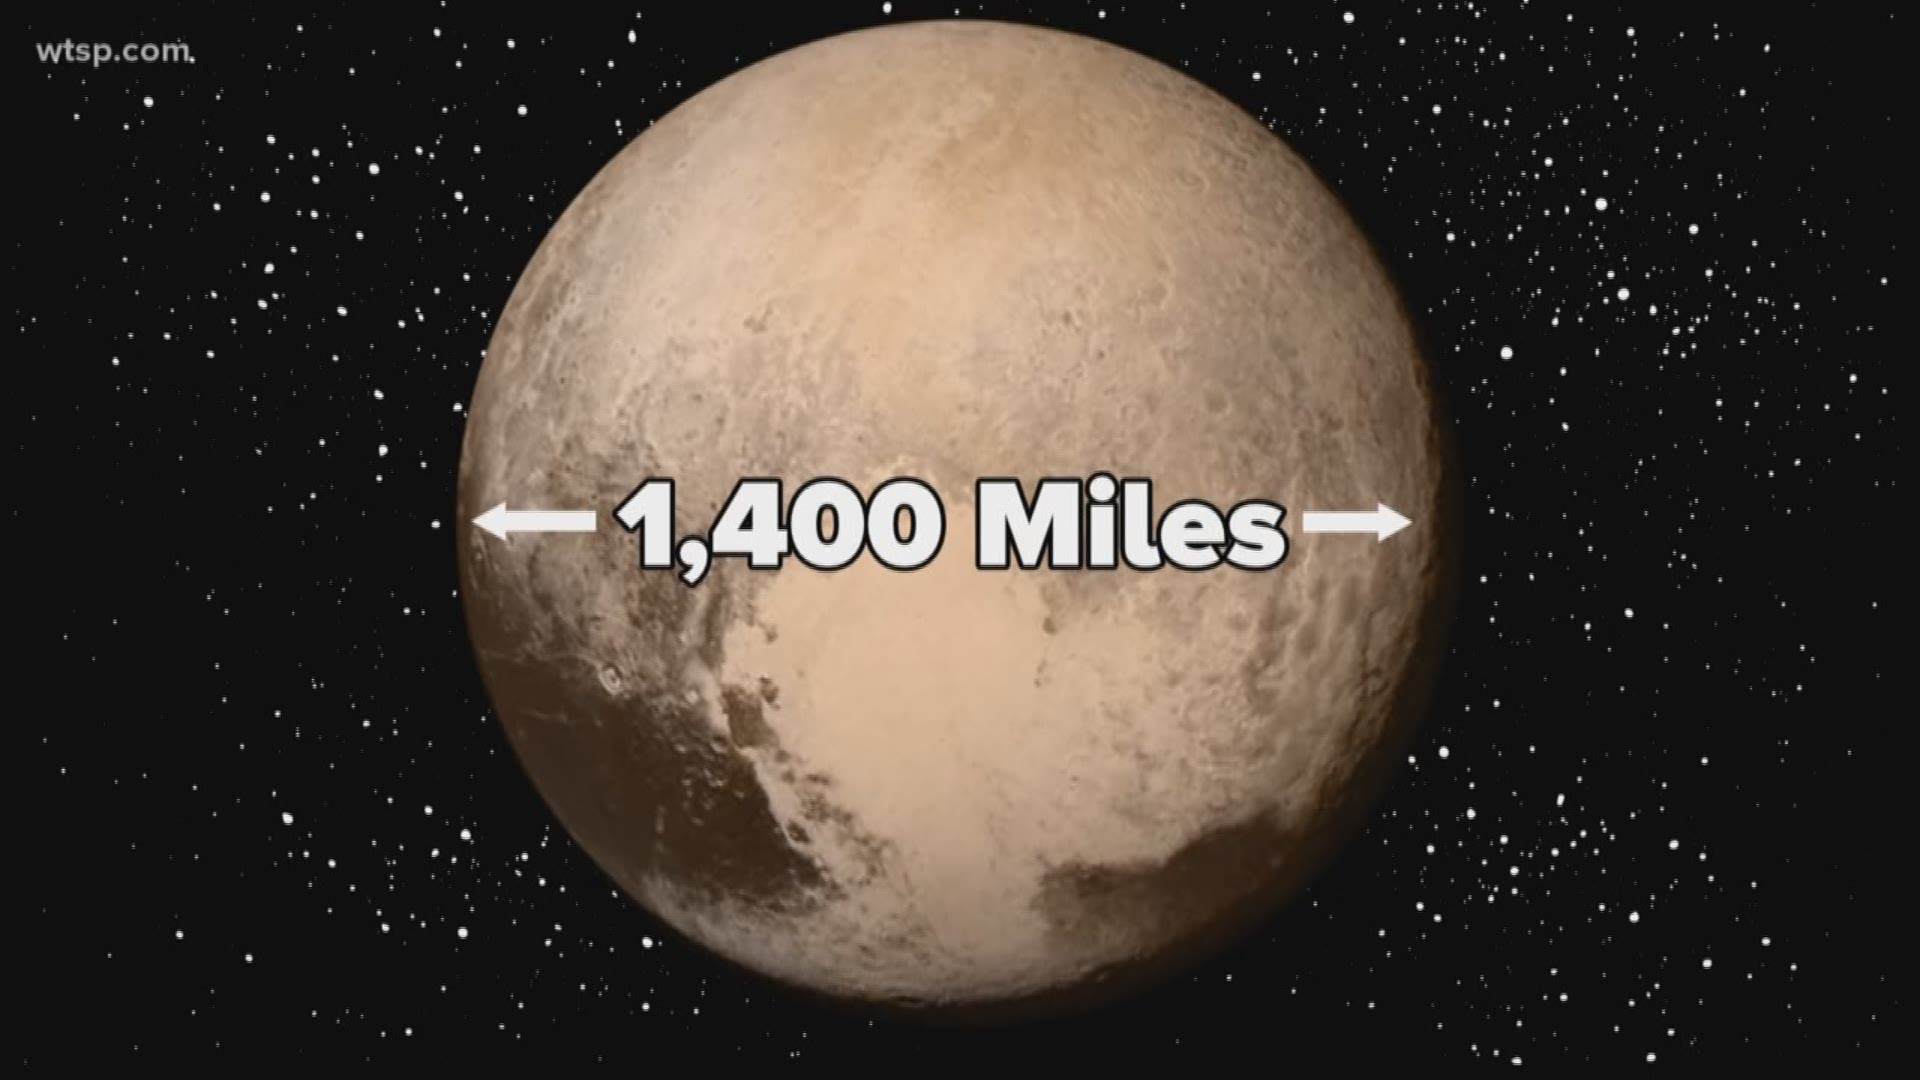 We go Beyond the Headline to see if Pluto is a planet.